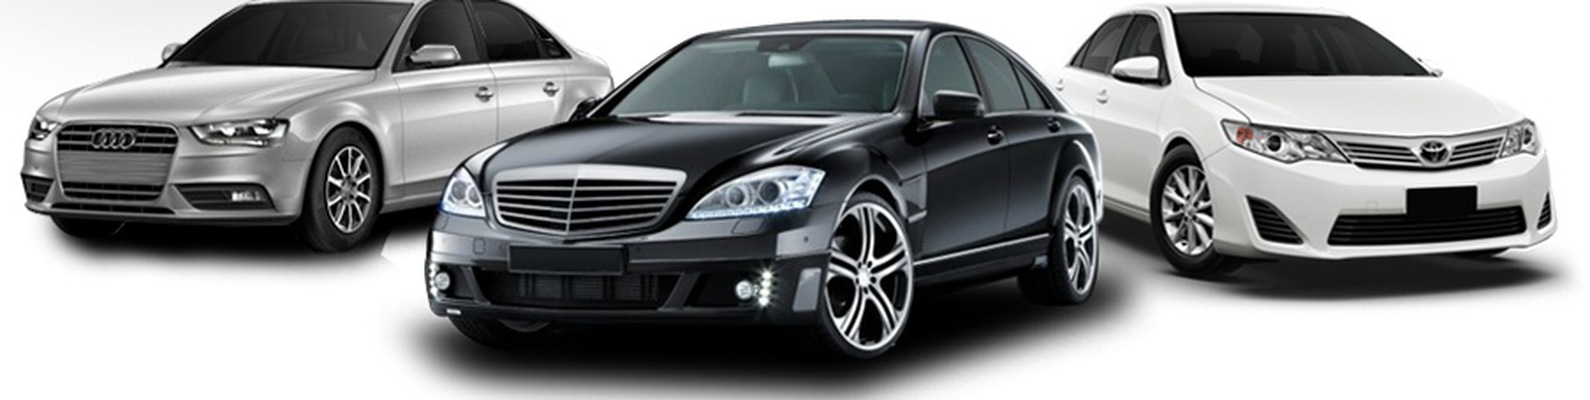 luxury cars for rent london